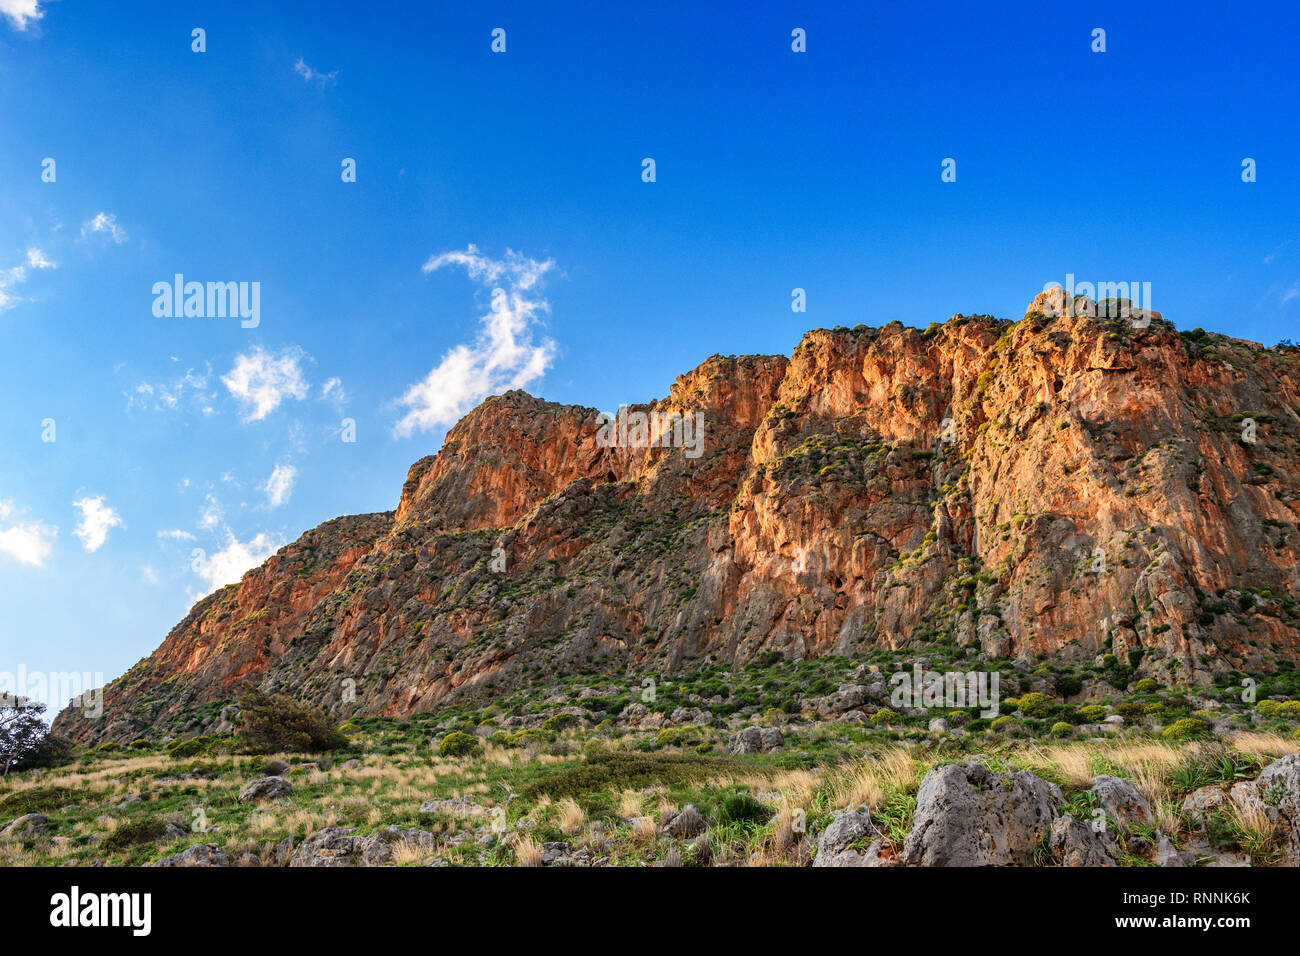 Impressive view of the Great Rock of Monemvasia island and the medieval 'castletown' in Laconia against a deep blye sky. Monemvasia. Stock Photo